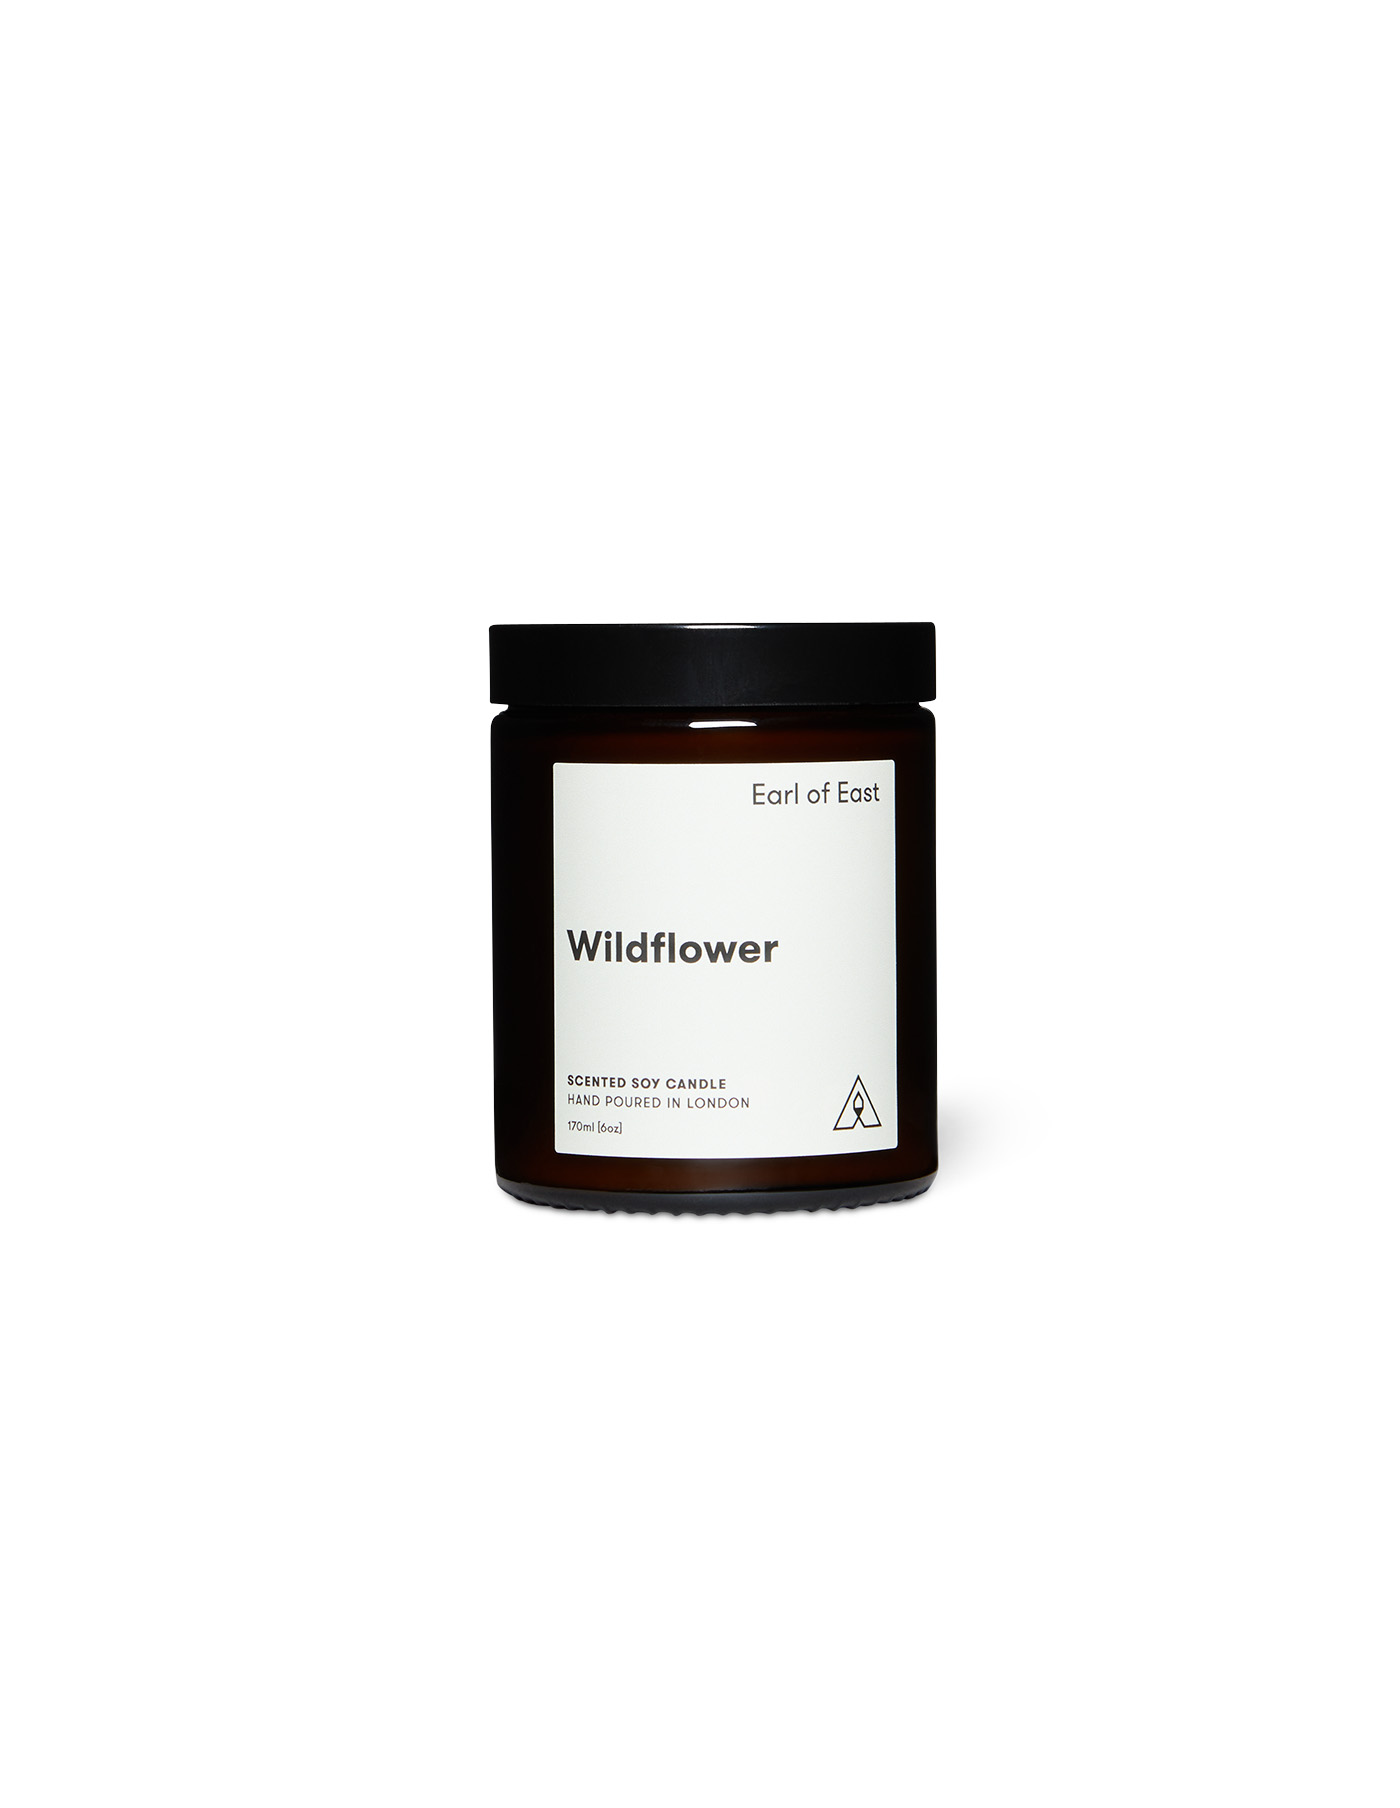 Earl of East London Wildflower Soy Wax Candle